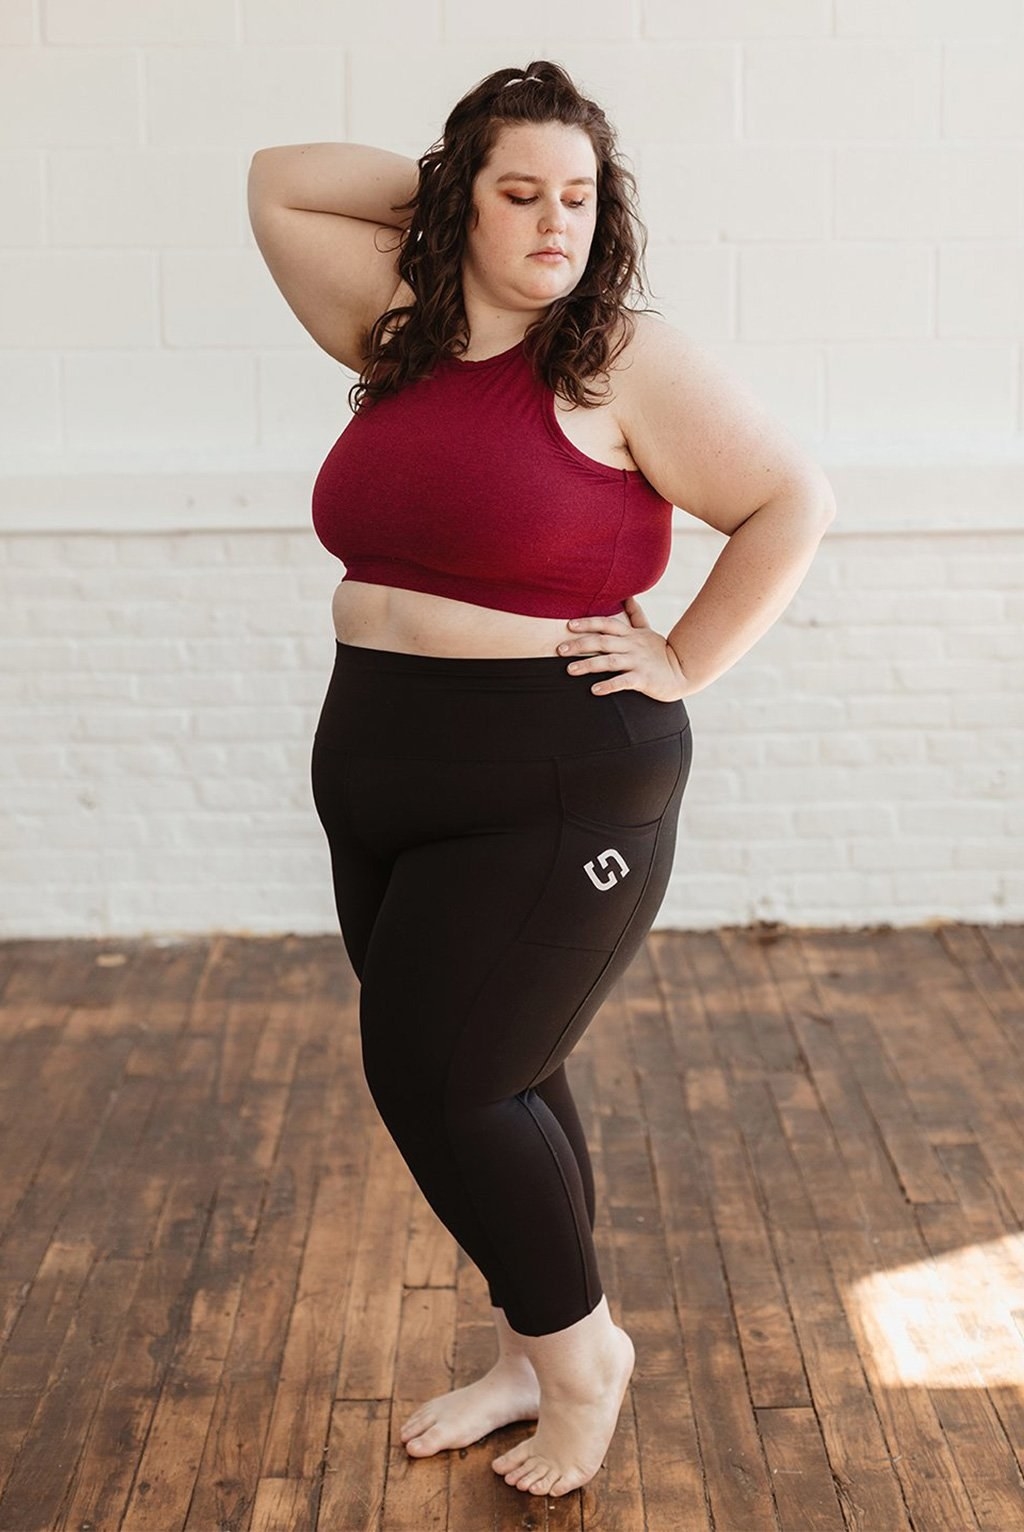 model wearing black leggings and a red sports bra